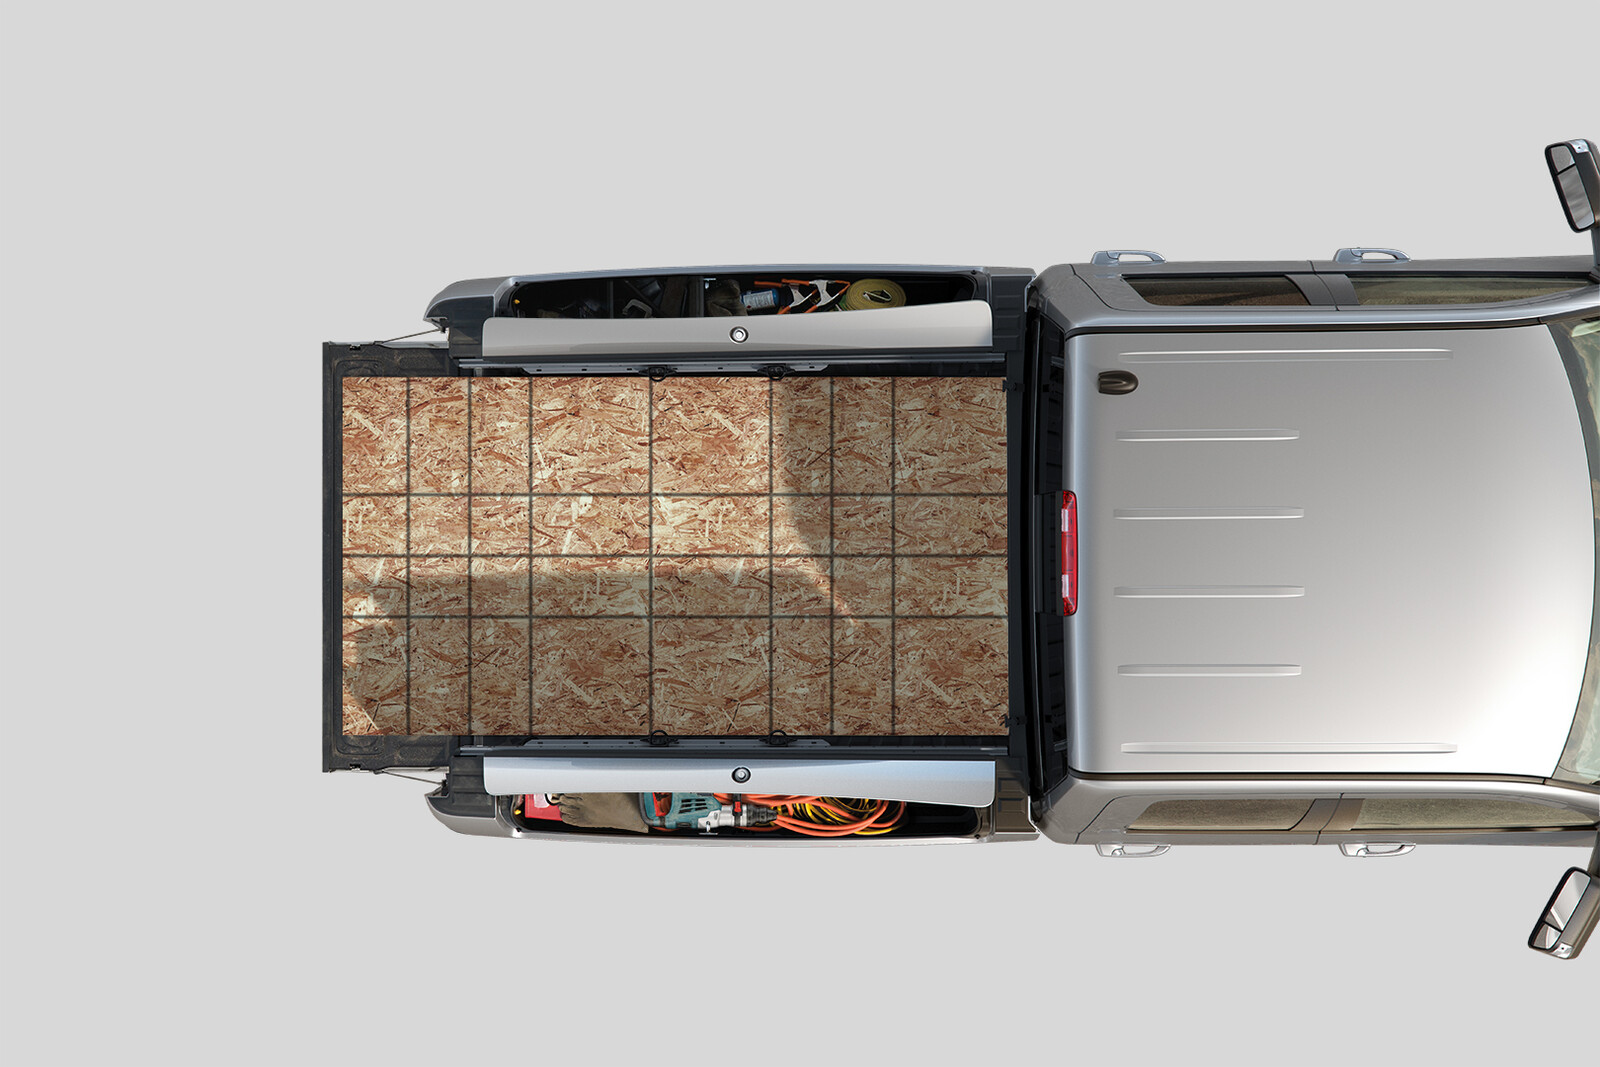 RAM 1500: Partial CG Composition
Tasks: Materials, Lighting, &amp; Retouching
CG Elements: Truck bed &amp; cab
(removed worker &amp; ground, added new tool in storage compartment)